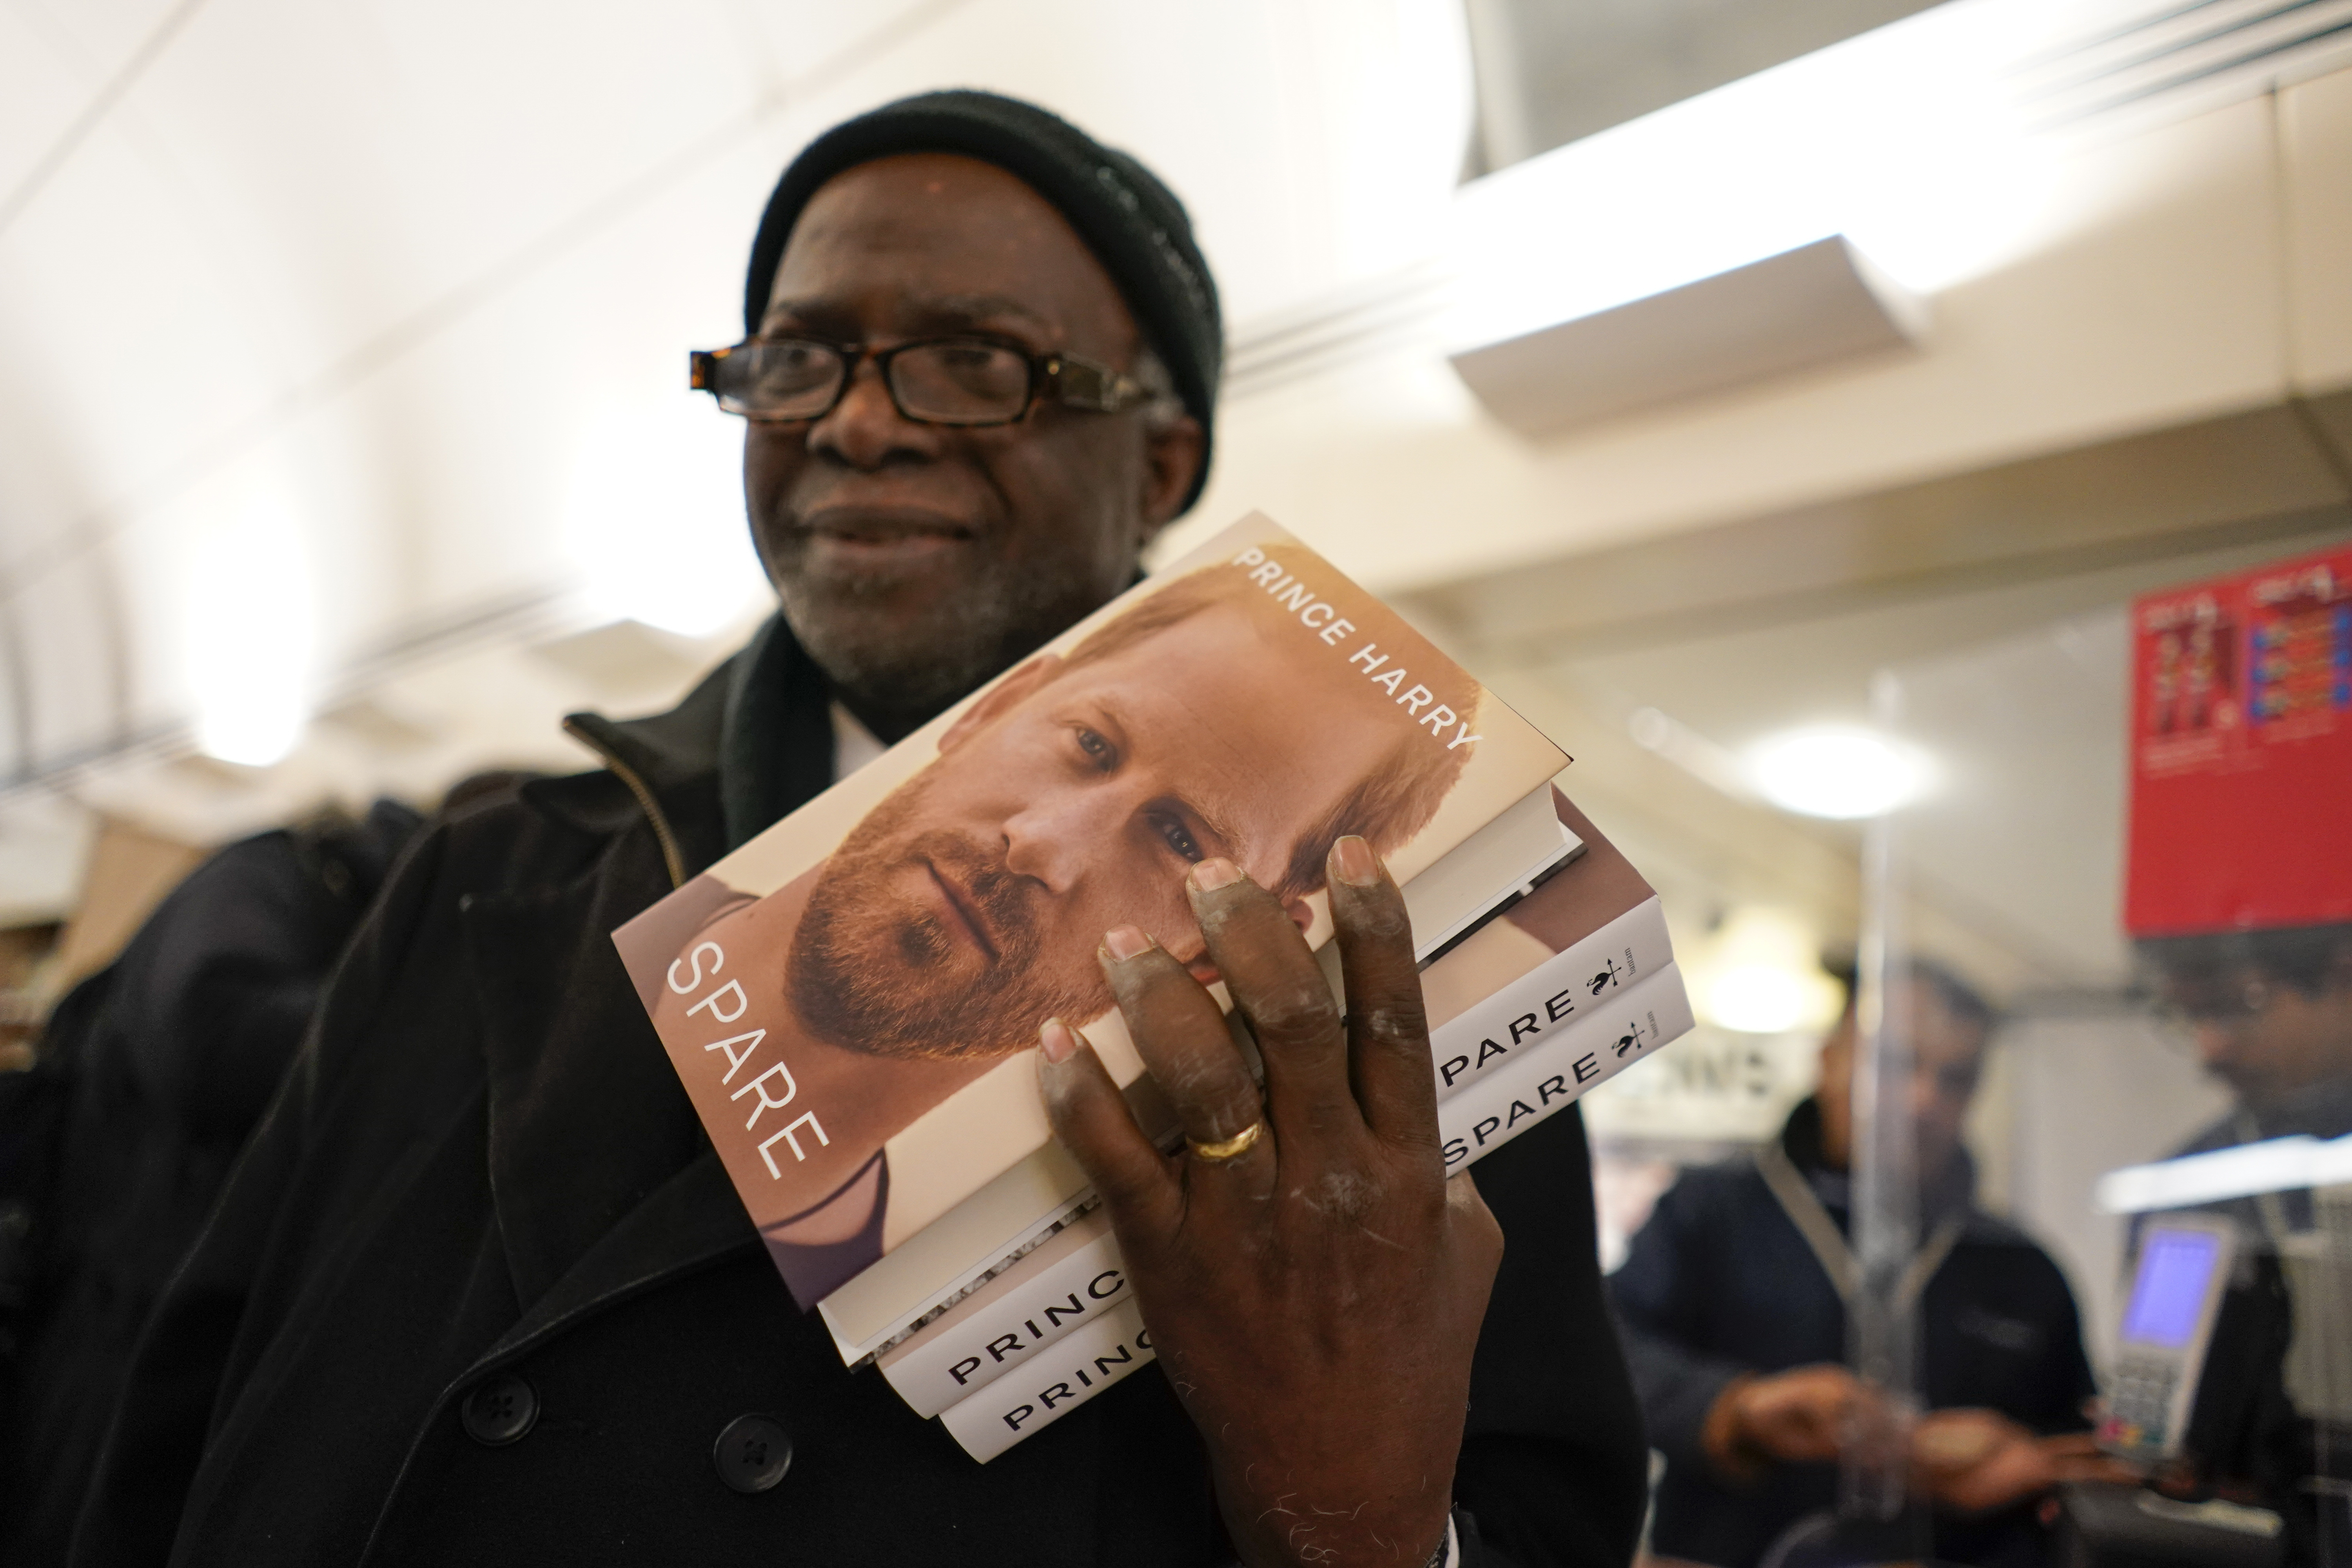 A customer holds copies of the new book by Prince Harry called "Spare" at a book store during a midnight opening in London, Tuesday, Jan. 10, 2023. 